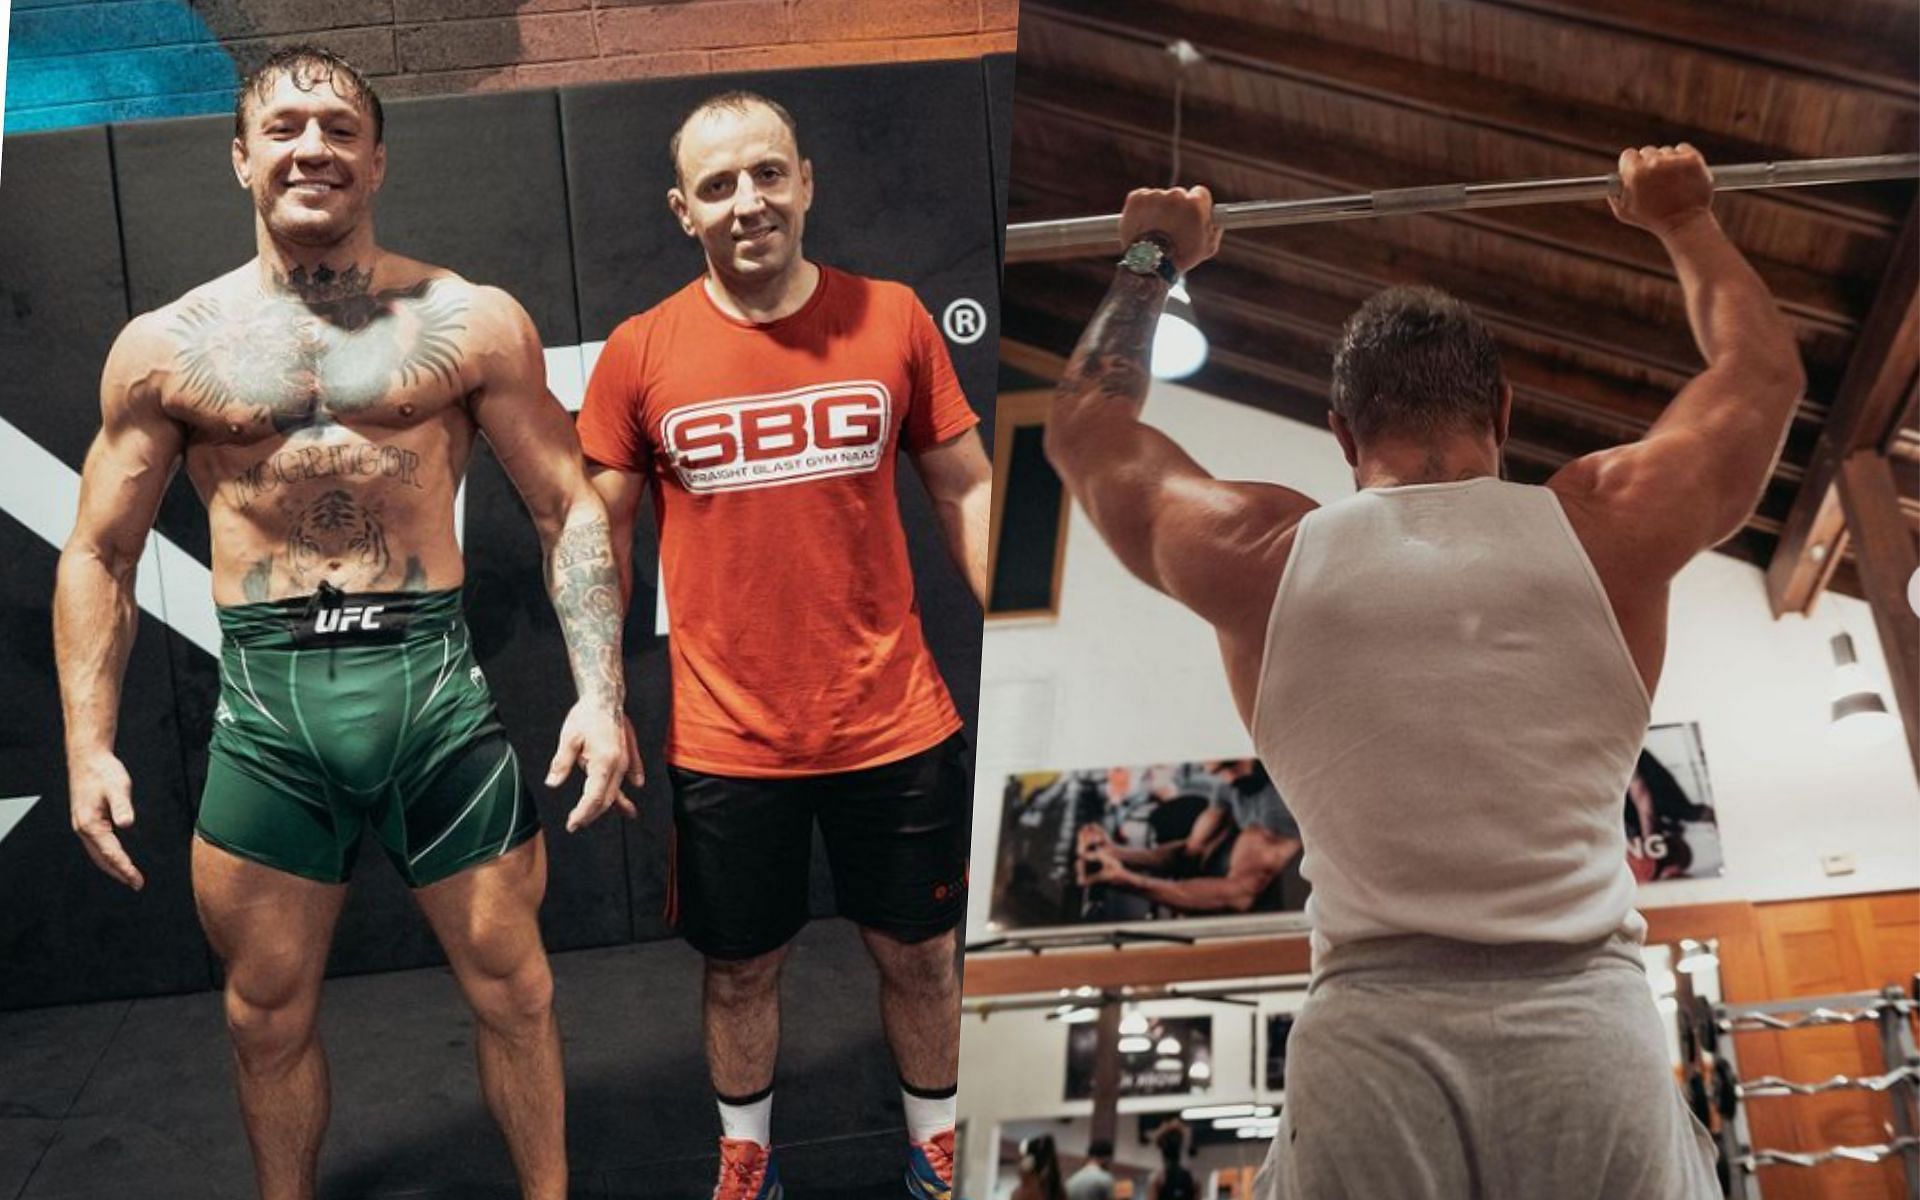 Former 145 lbs. and 155 lbs. UFC champion Conor McGregor claims that he weighs 265 lbs [Images courtesy: @thenotoriousmma on Instagram]